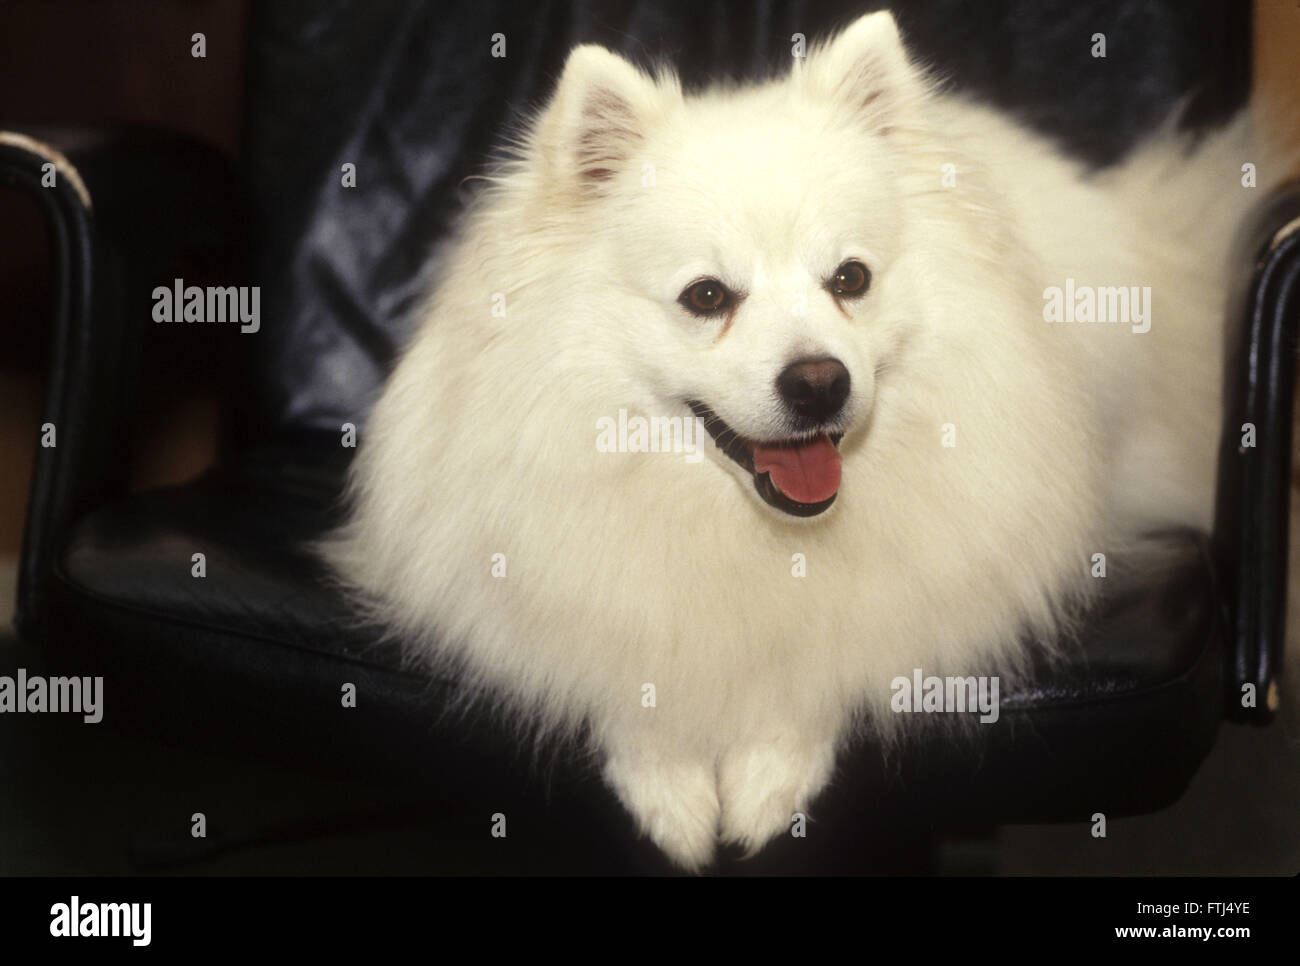 American Eskimo dog with smile on face lying on couch Stock Photo